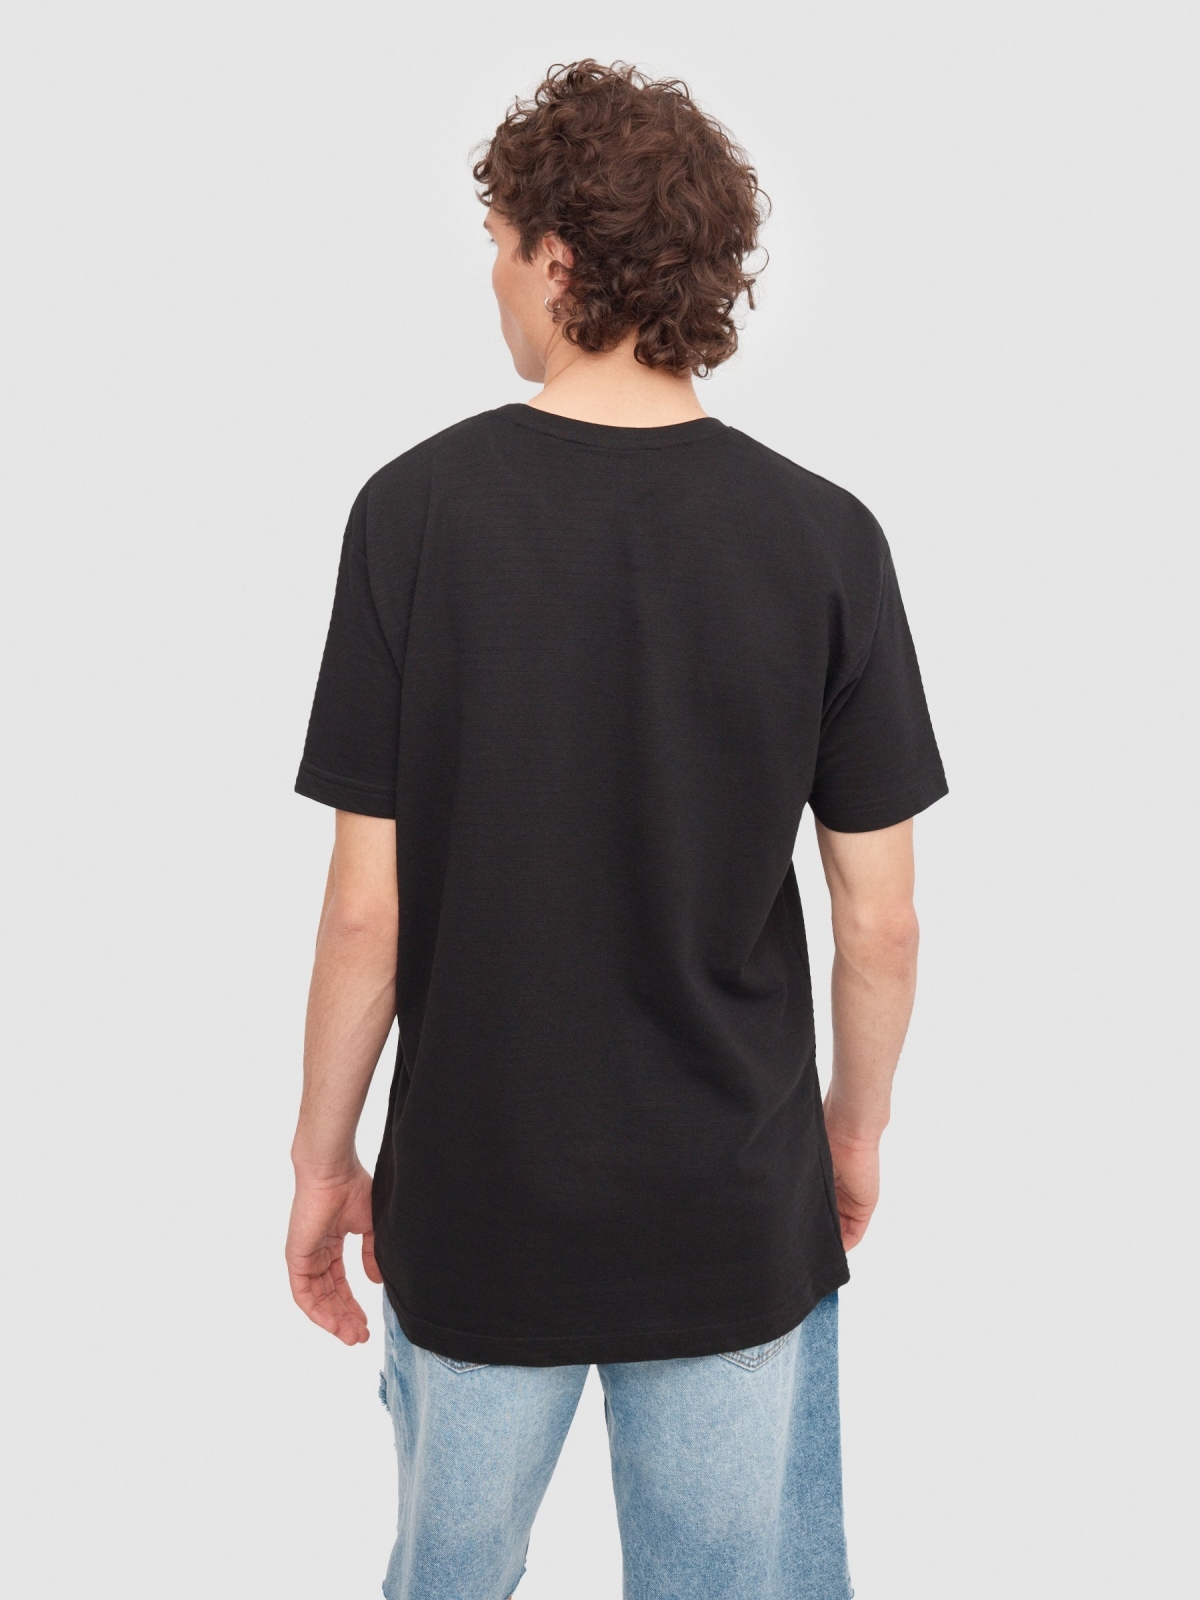 Striped T-shirt black middle back view